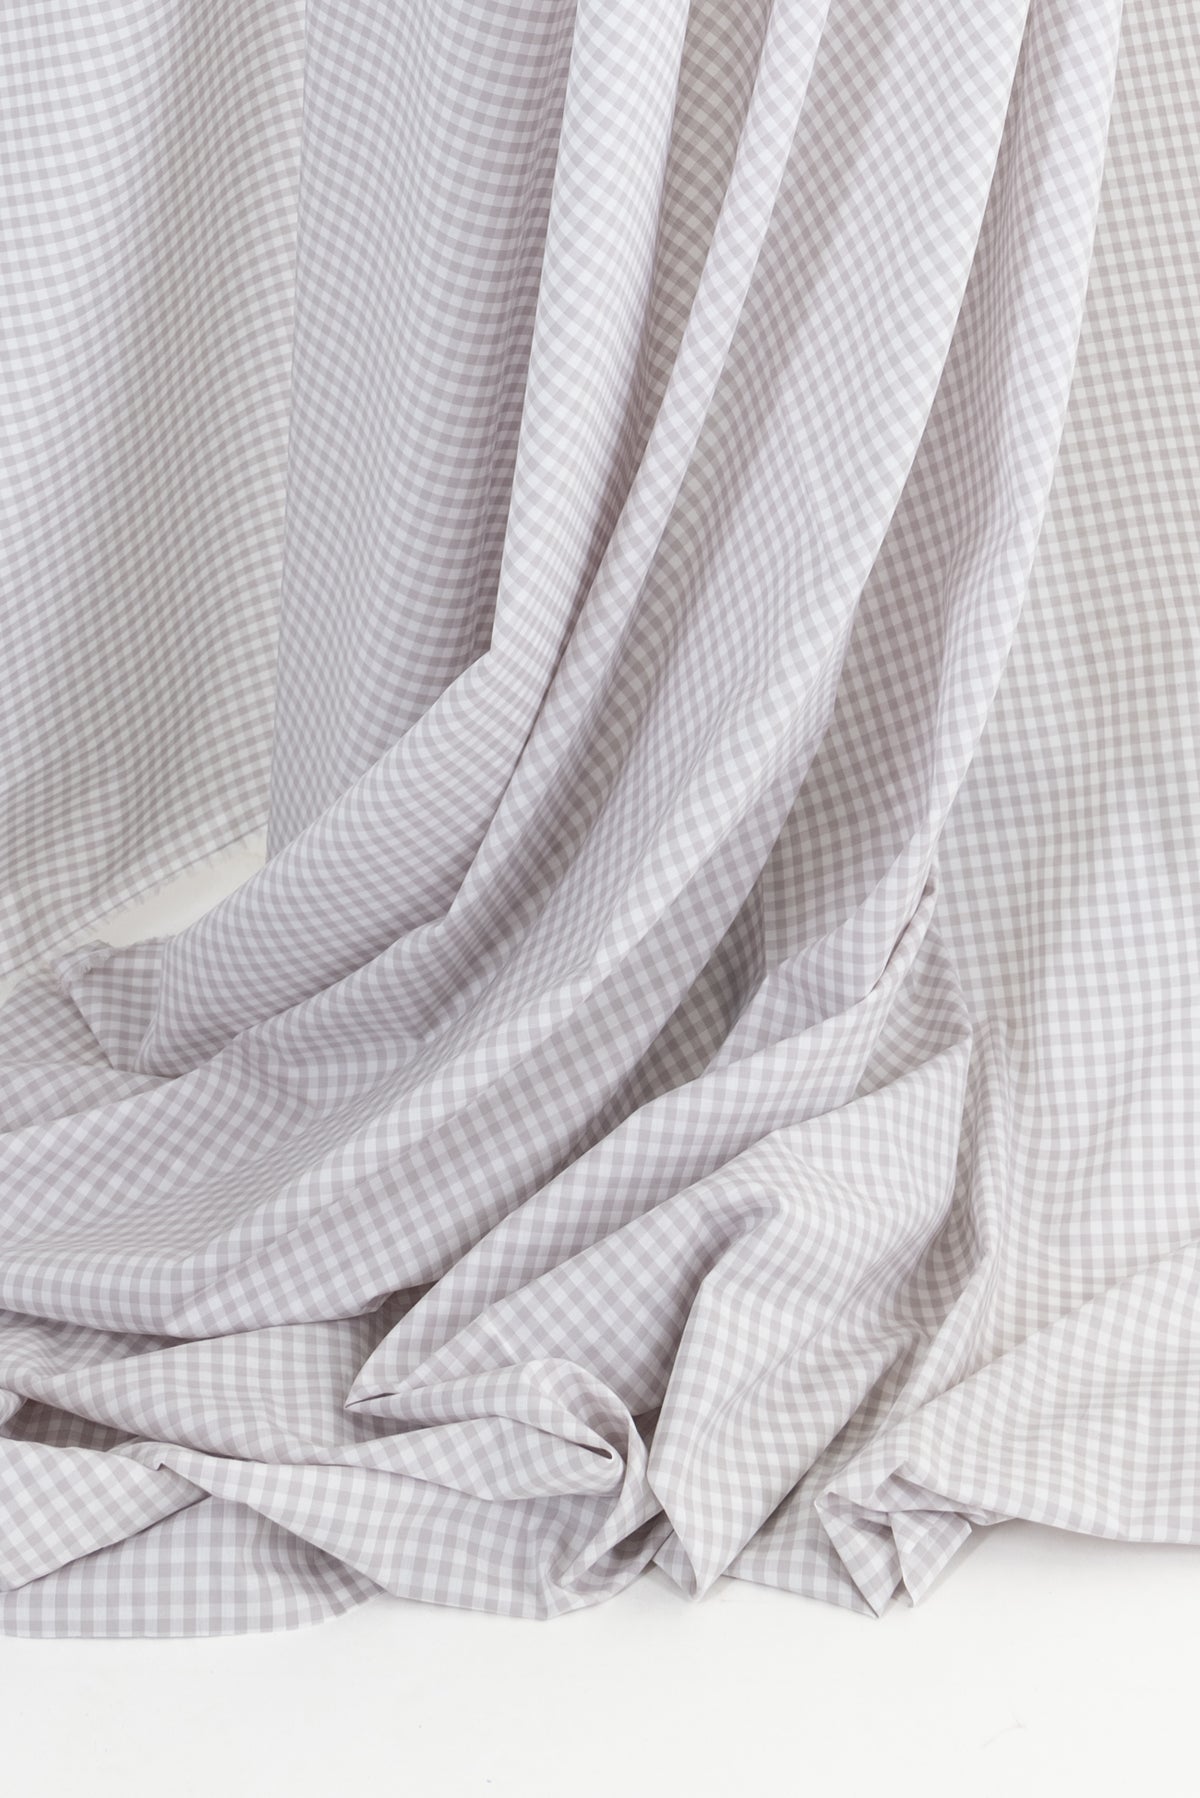 Lady Gray Japanese Cotton Gingham Woven